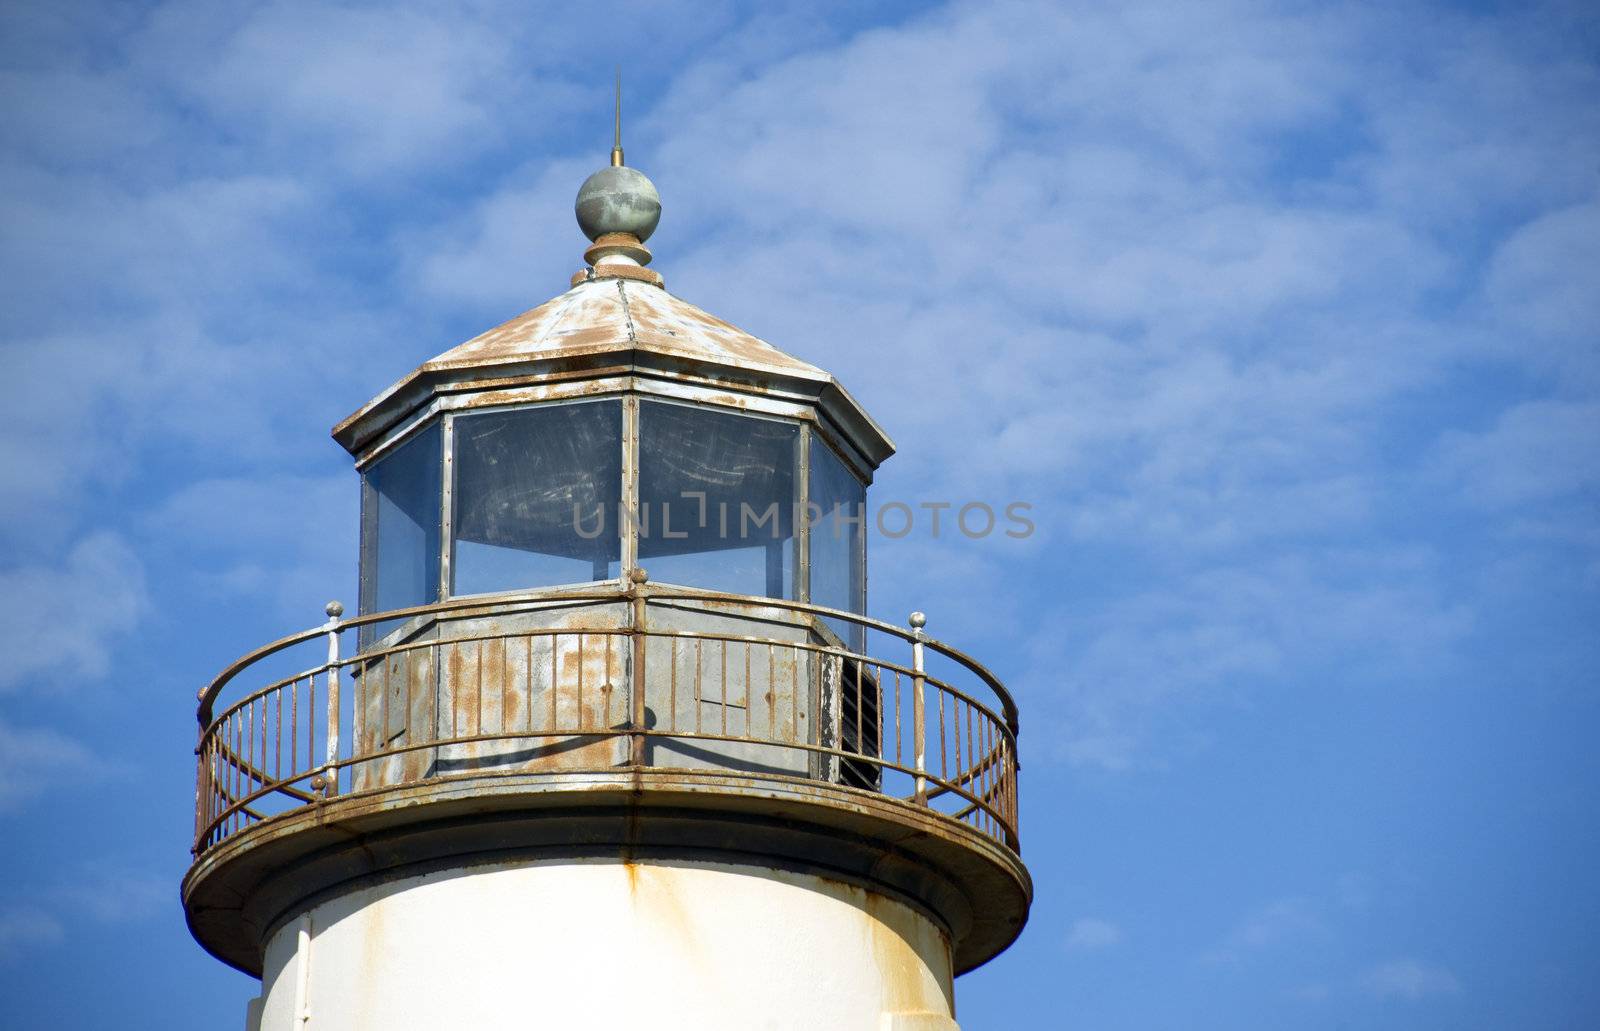 Lighthouse Top by ChrisBoswell